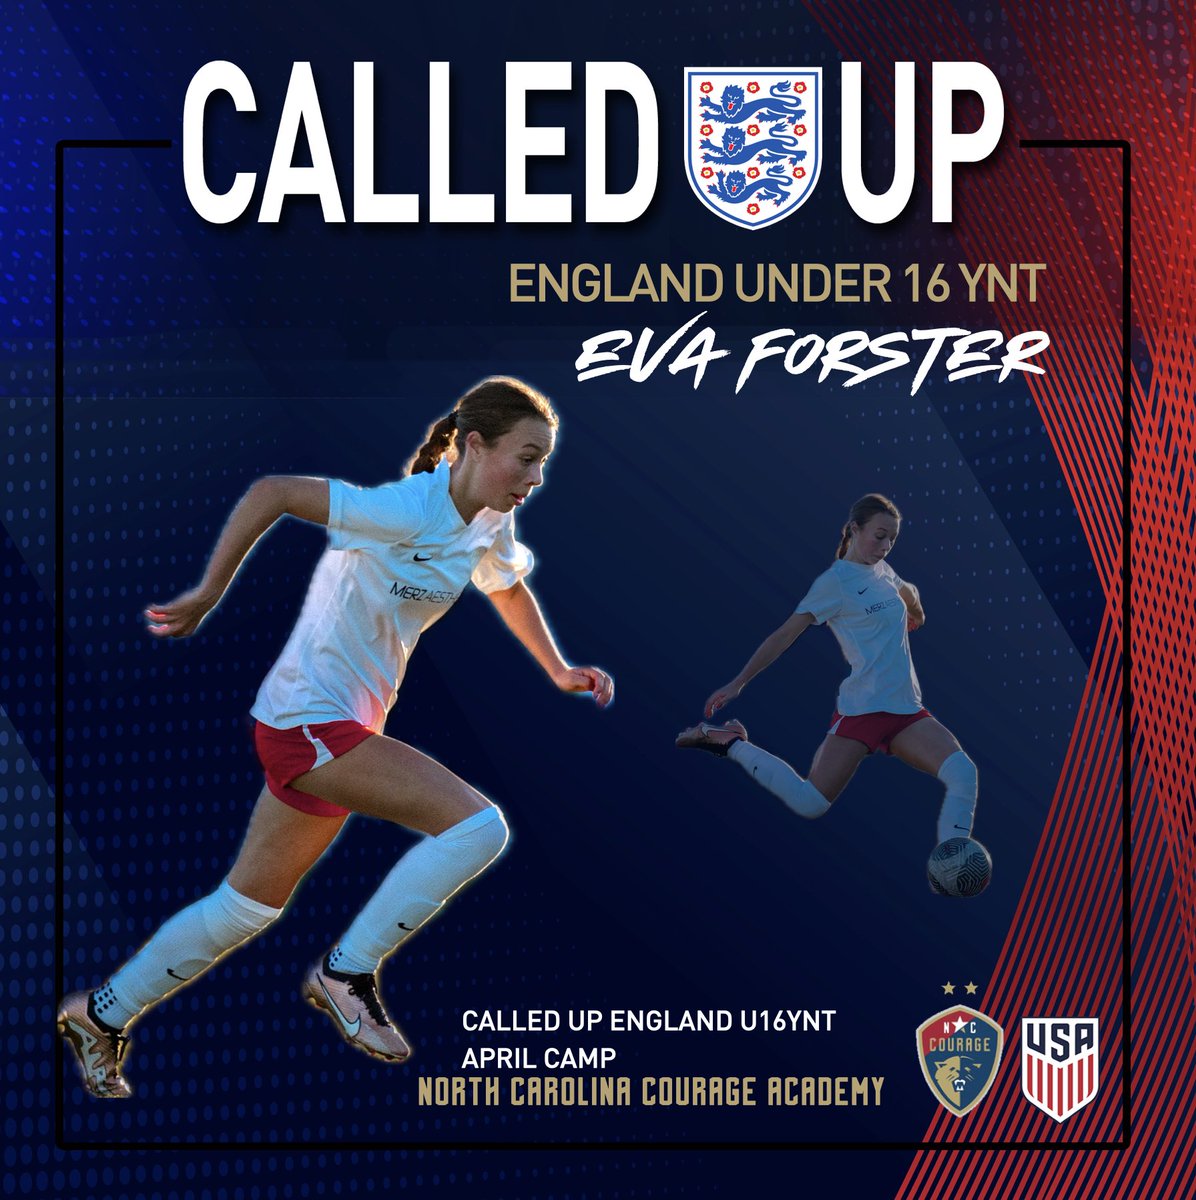 Congratulations to Eva Forster on her call-up to the England U-16 YNT Safe Travels and good luck at camp Eva! 🏴󠁧󠁢󠁥󠁮󠁧󠁿